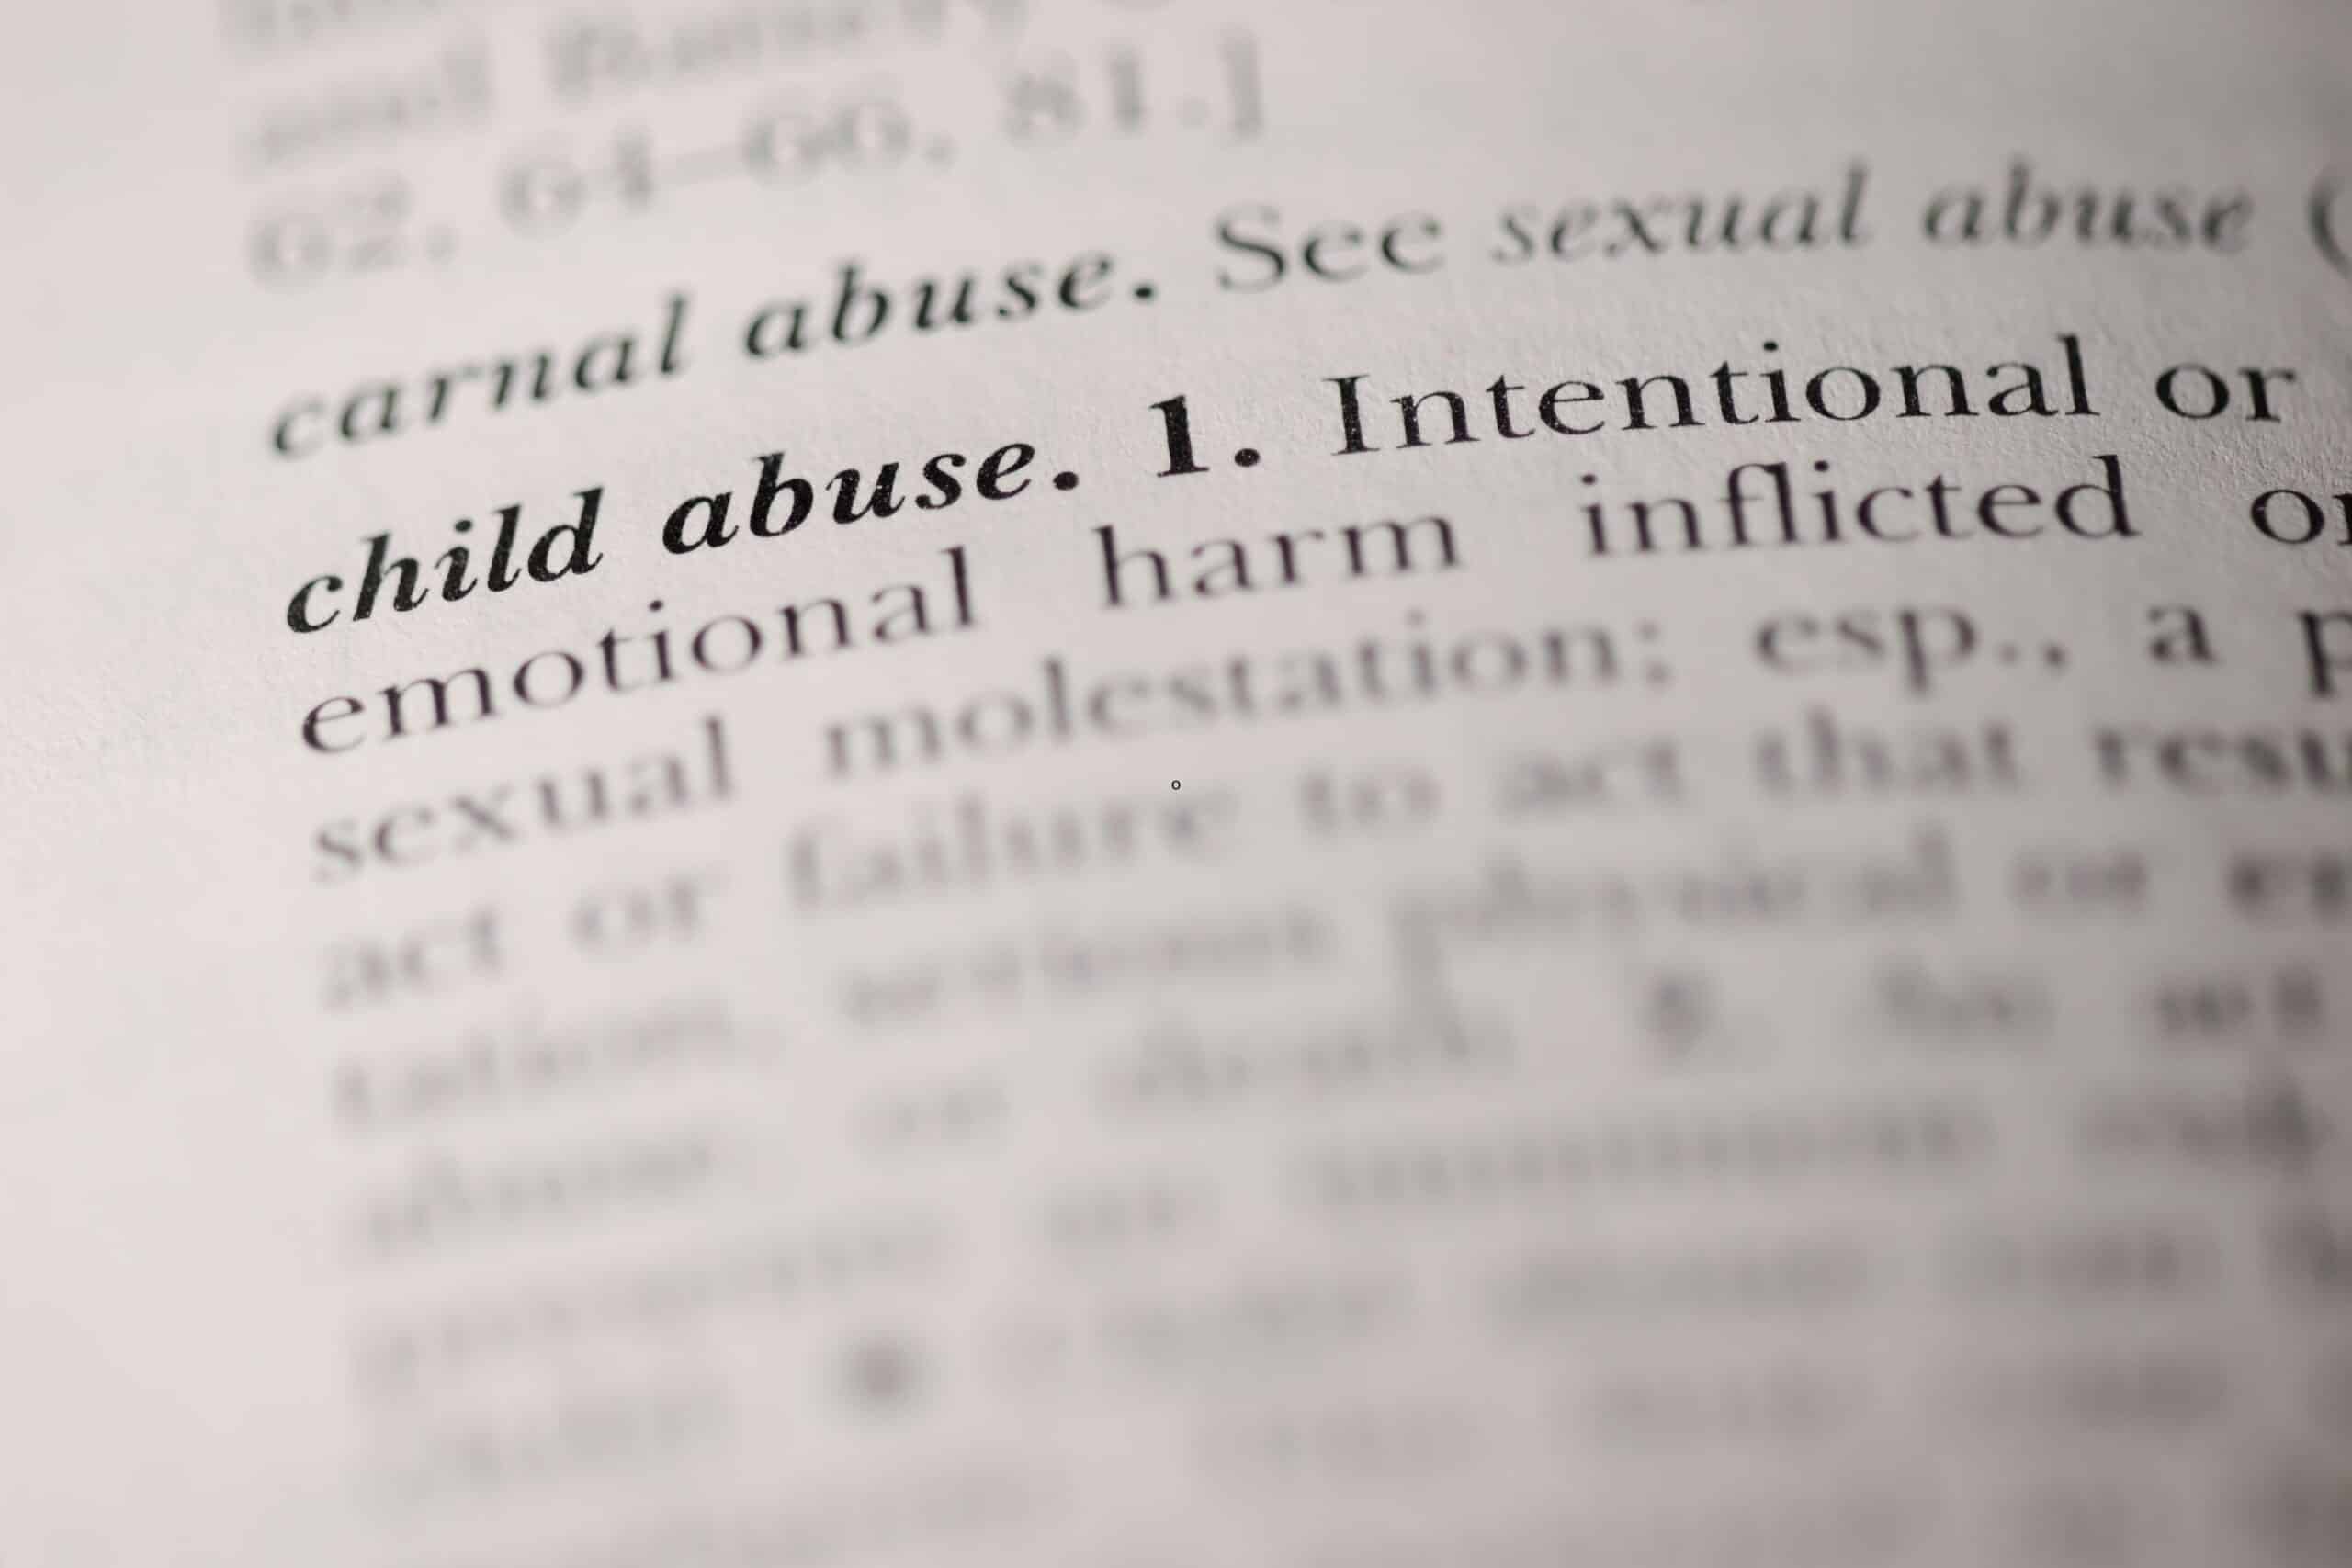 Facing Child Abuse Accusations in MN: Know Your Rights and Legal Options